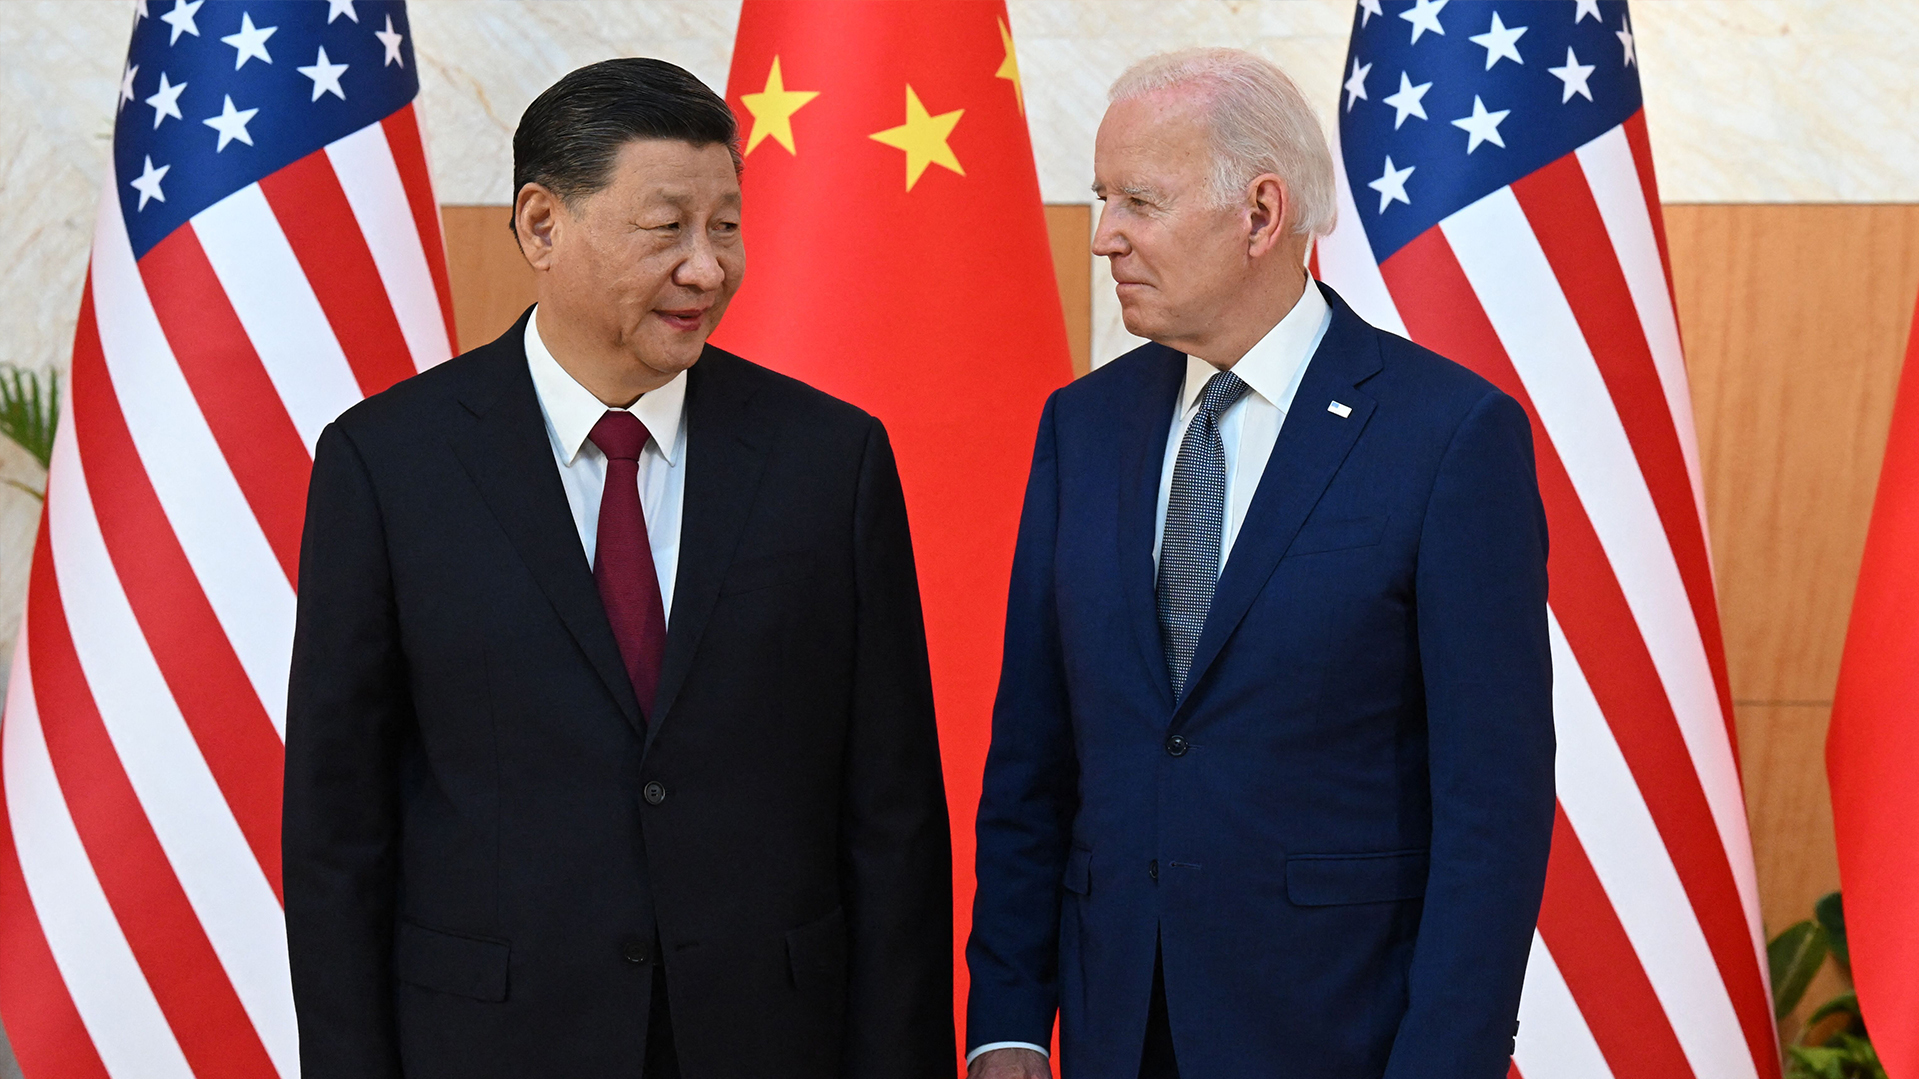 Biden and Xi are meeting this week with U.S.-China relations near an all-time low. Here's what's at stake for the highly anticipated face-to-face.